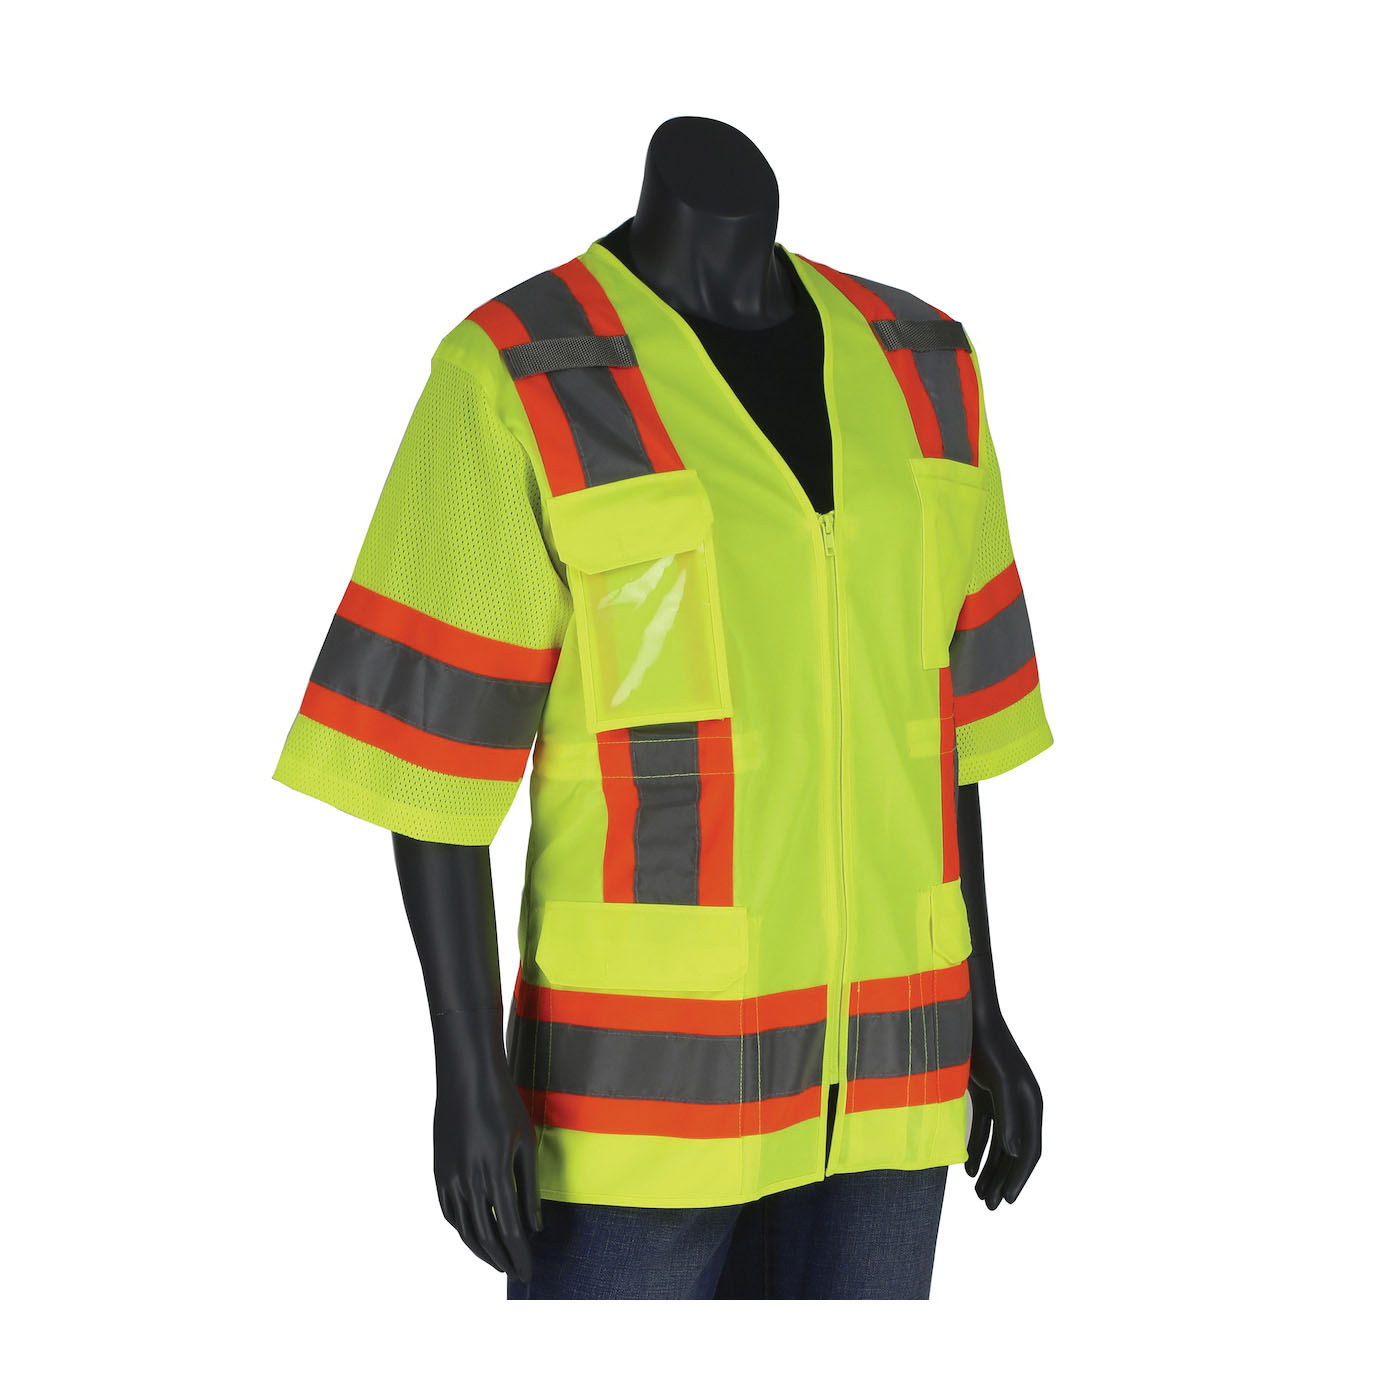 PIP® 303-0513-LY/L 2-Tone Contoured Surveyor's Vest With Solid Front and Mesh Back, L, Hi-Vis Yellow, 100% Polyester Mesh/Solid Tricot Knit, Zipper Closure, 11 Pockets, ANSI Class: Type/Class R3